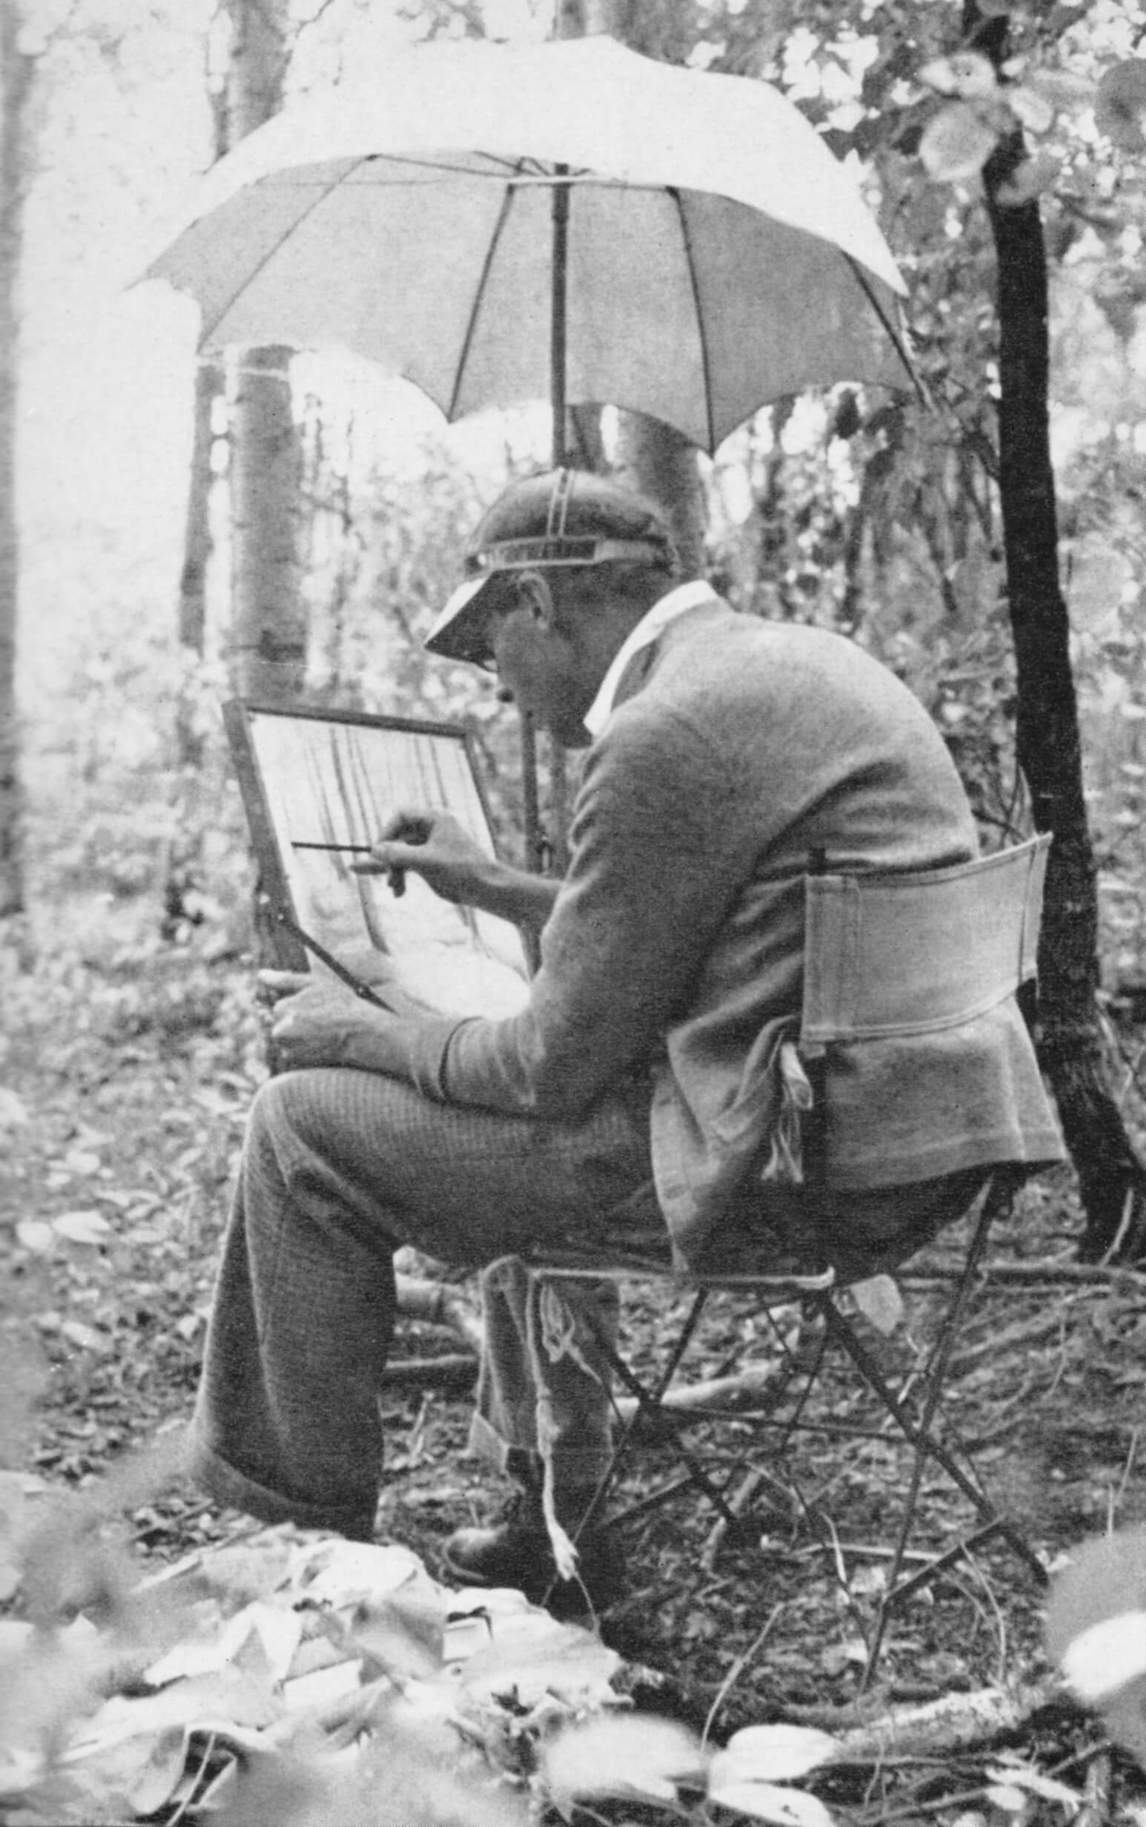 Art Canada Institute, A.O. Brigden, photograph of Lionel LeMoine FitzGerald drawing at Silver Heights, August 23, 1934